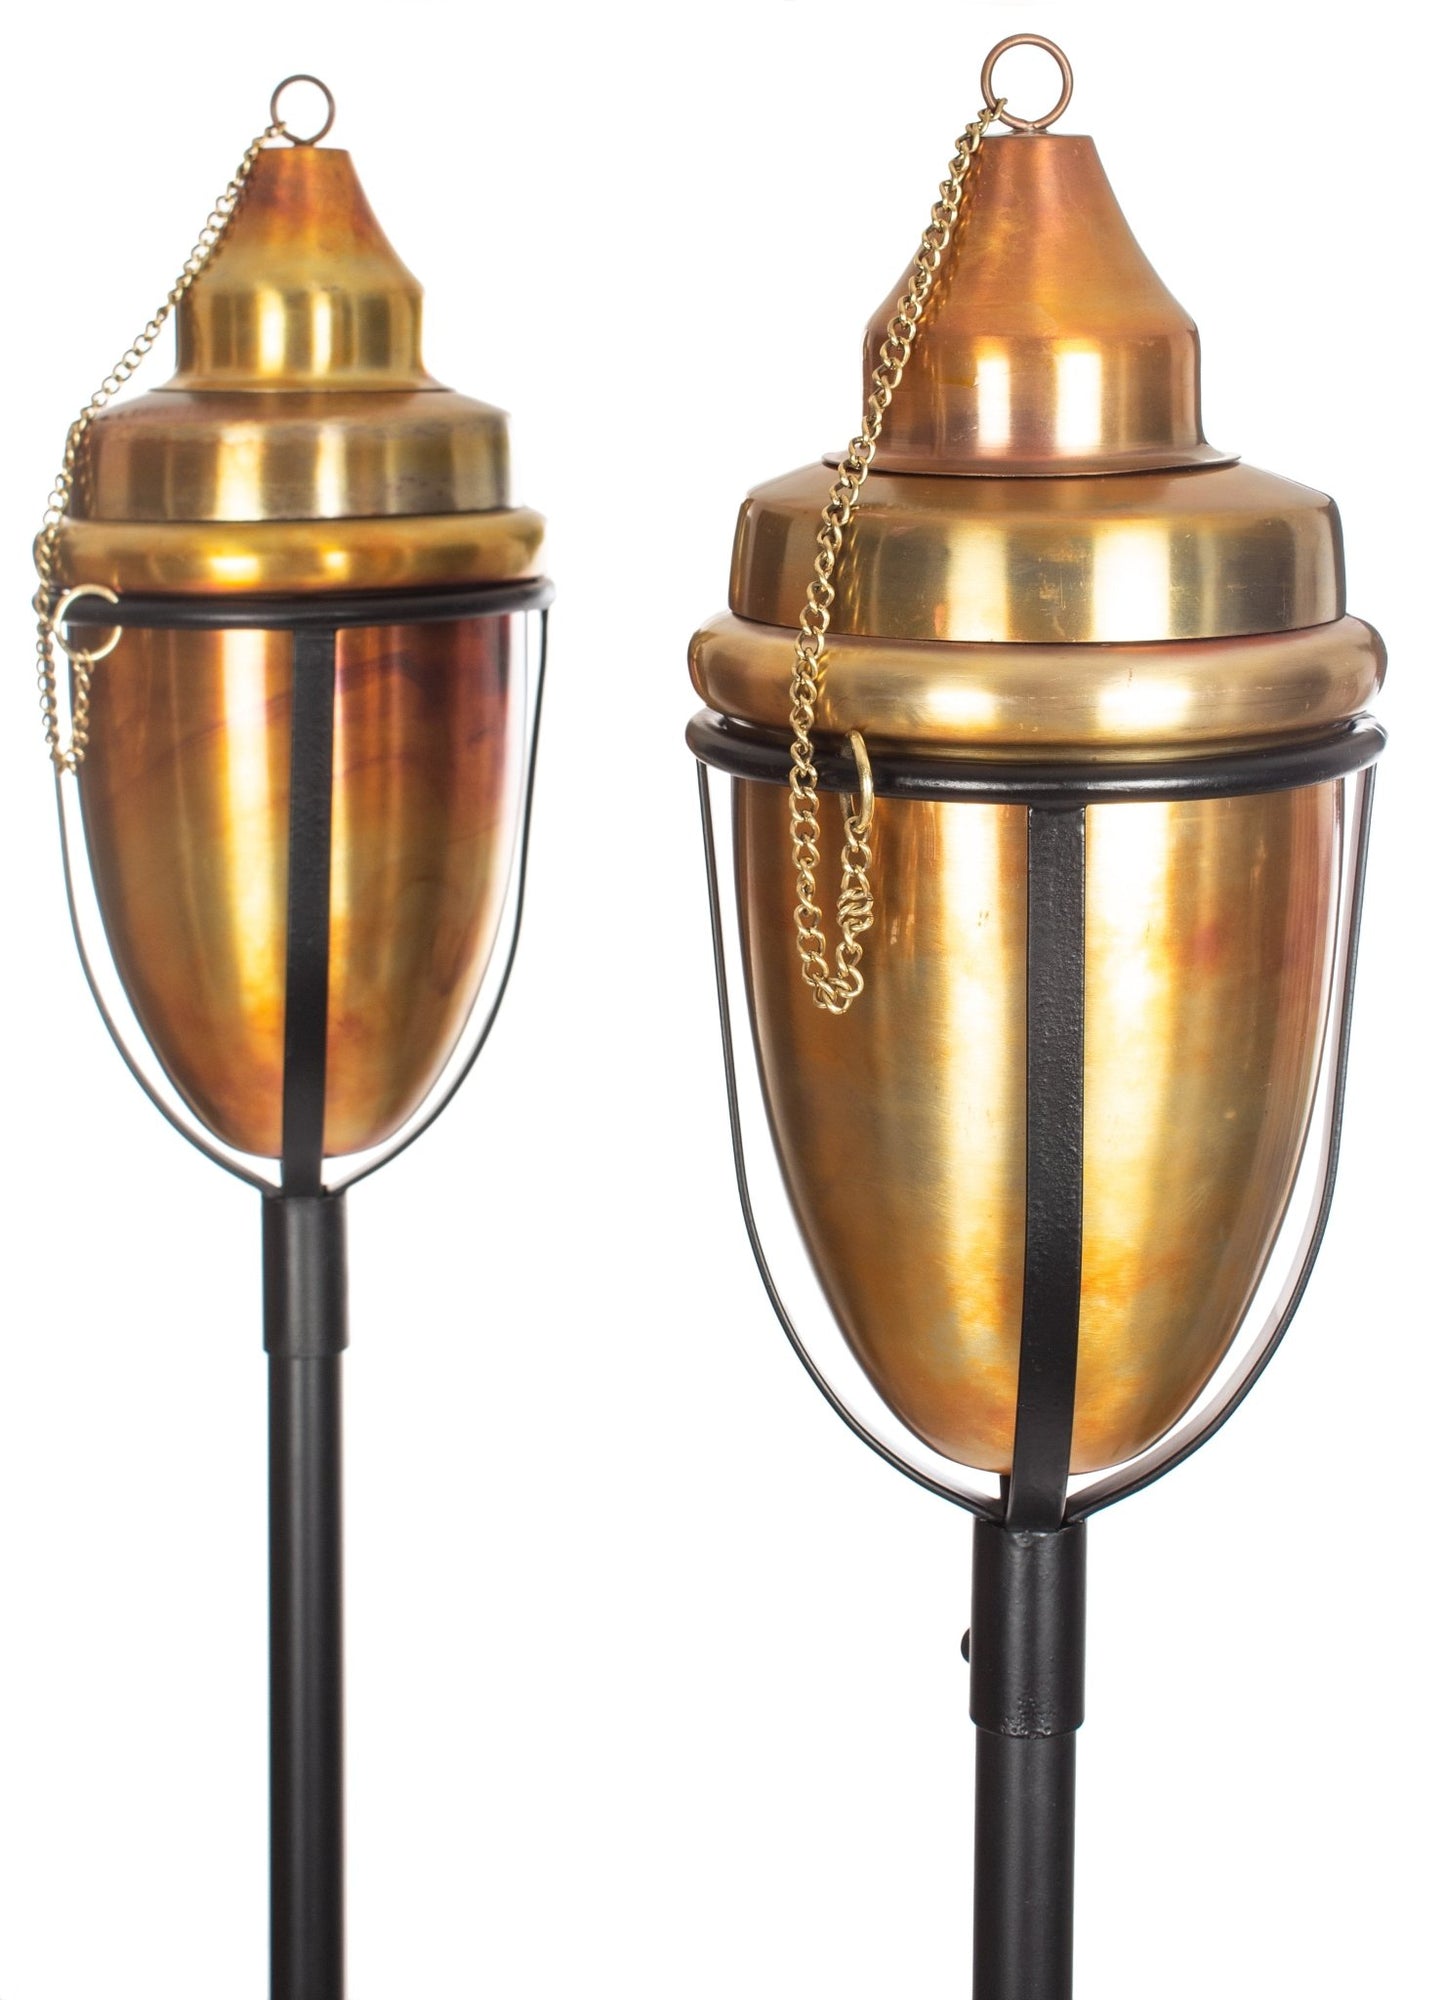 H Potter Copper Rustic Patio Garden Torch Set of Two